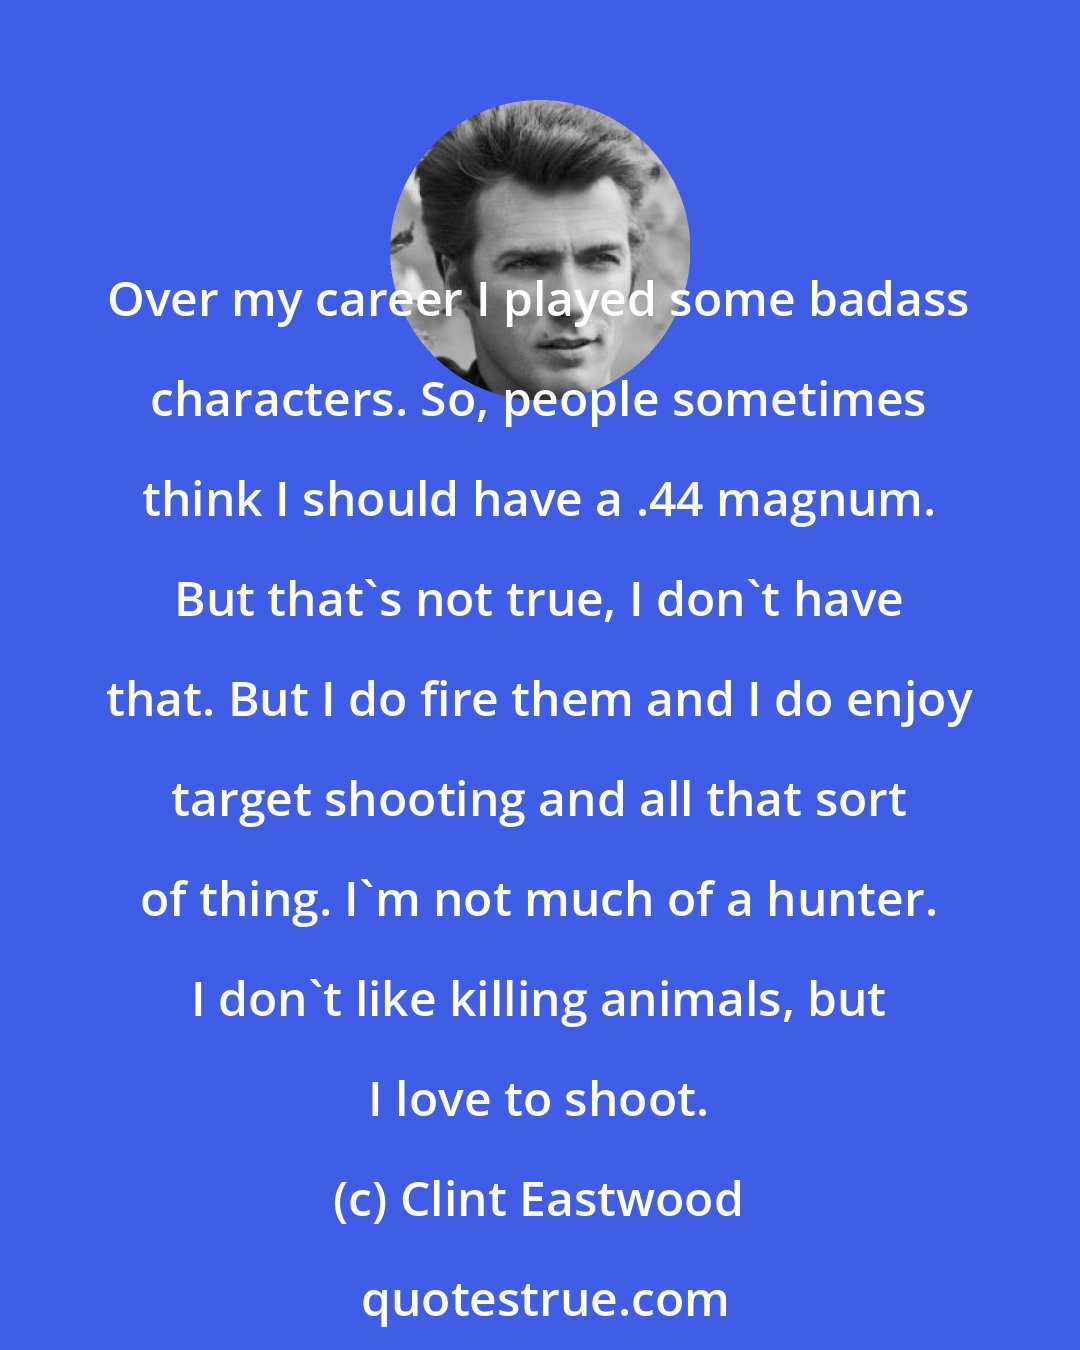 Clint Eastwood: Over my career I played some badass characters. So, people sometimes think I should have a .44 magnum. But that's not true, I don't have that. But I do fire them and I do enjoy target shooting and all that sort of thing. I'm not much of a hunter. I don't like killing animals, but I love to shoot.